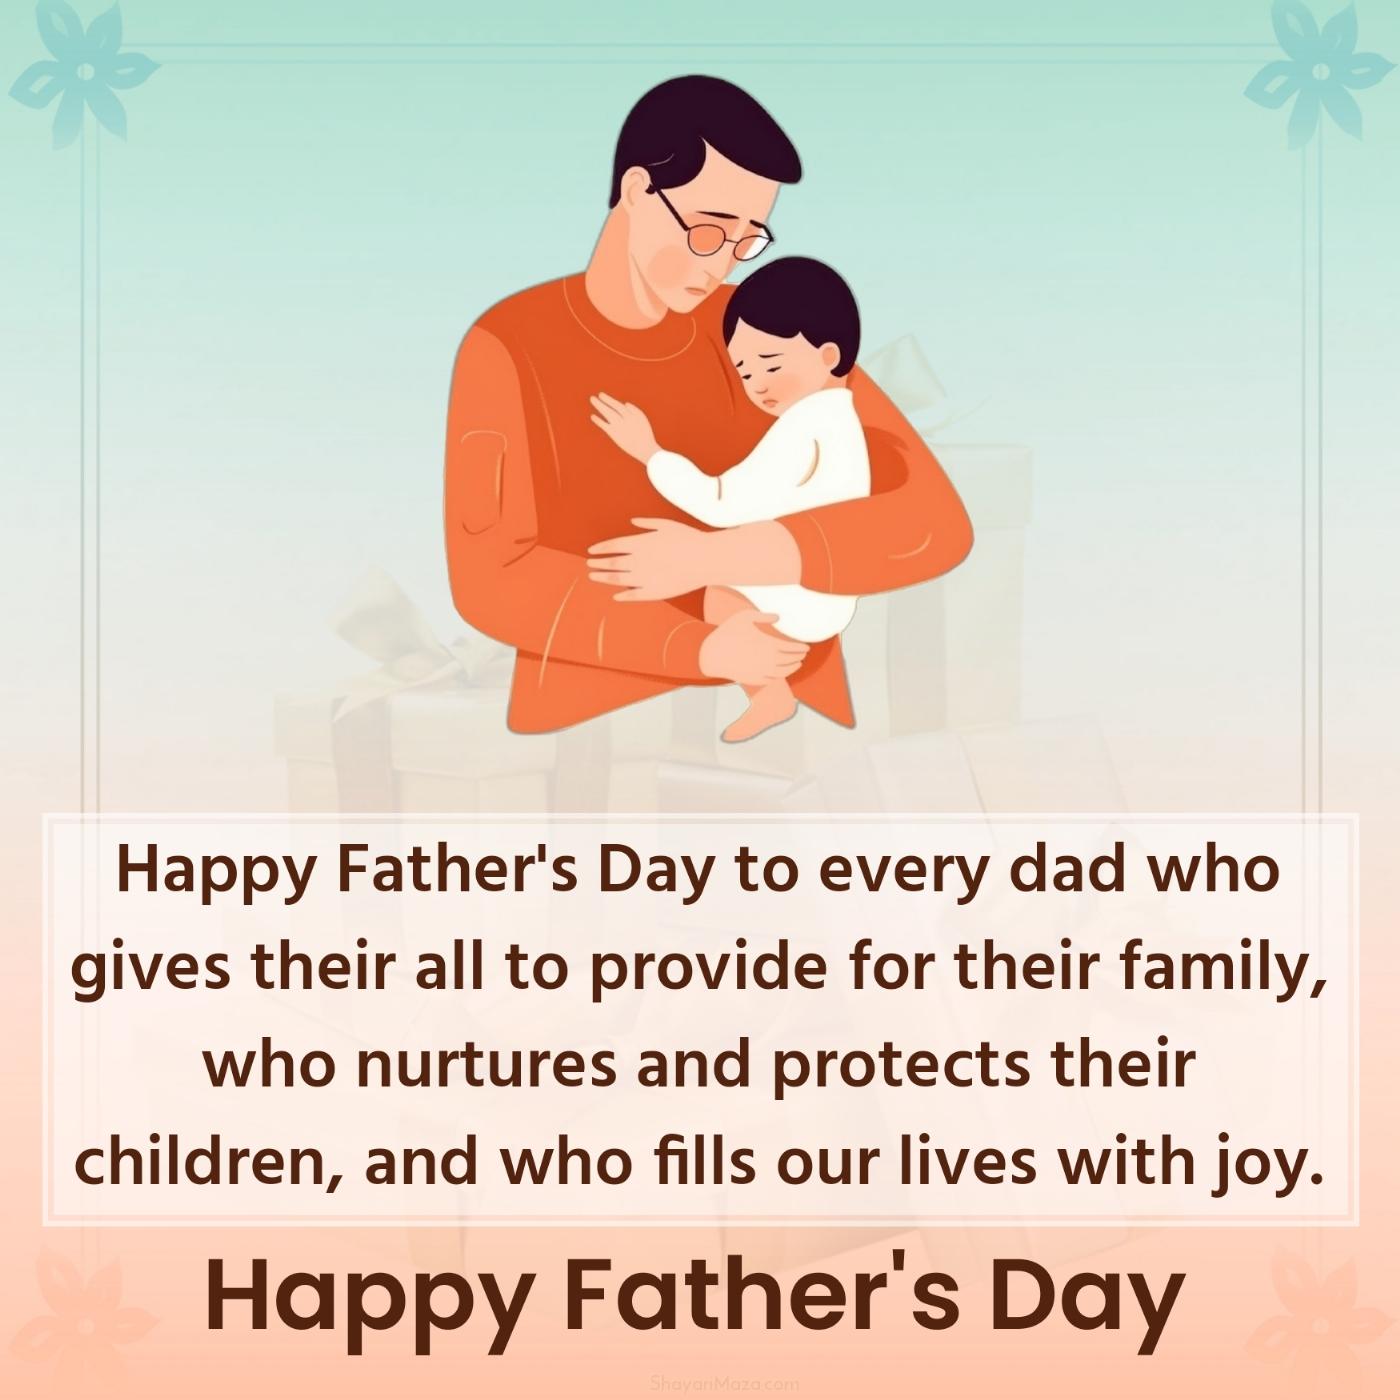 Happy Father's Day to every dad who gives their all to provide for their family